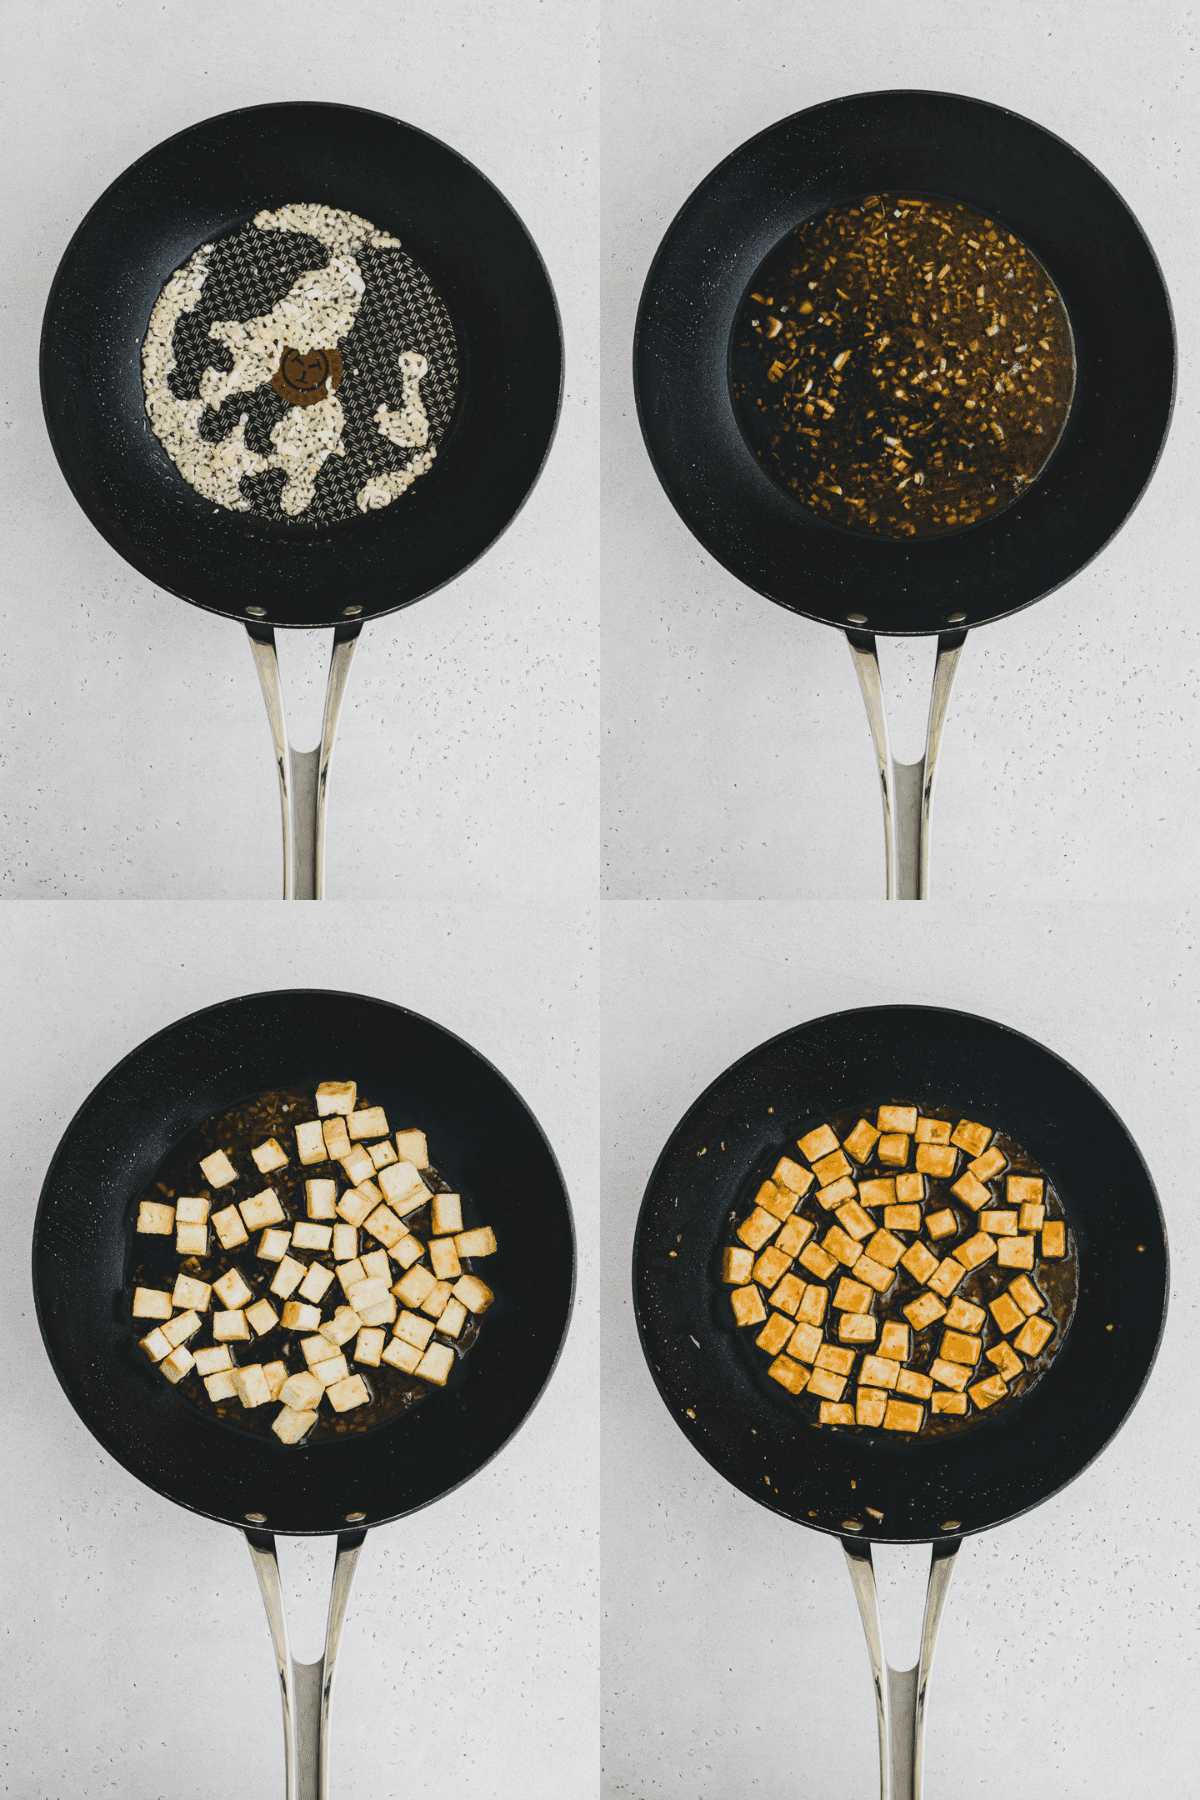 Gallery of four images each a top view of a pan: top left has oil and seasoning in it, top right is this mixture melted, bottom left has the tofu added in, bottom right is tofu cooked crispy in a teriyaki sauce. 